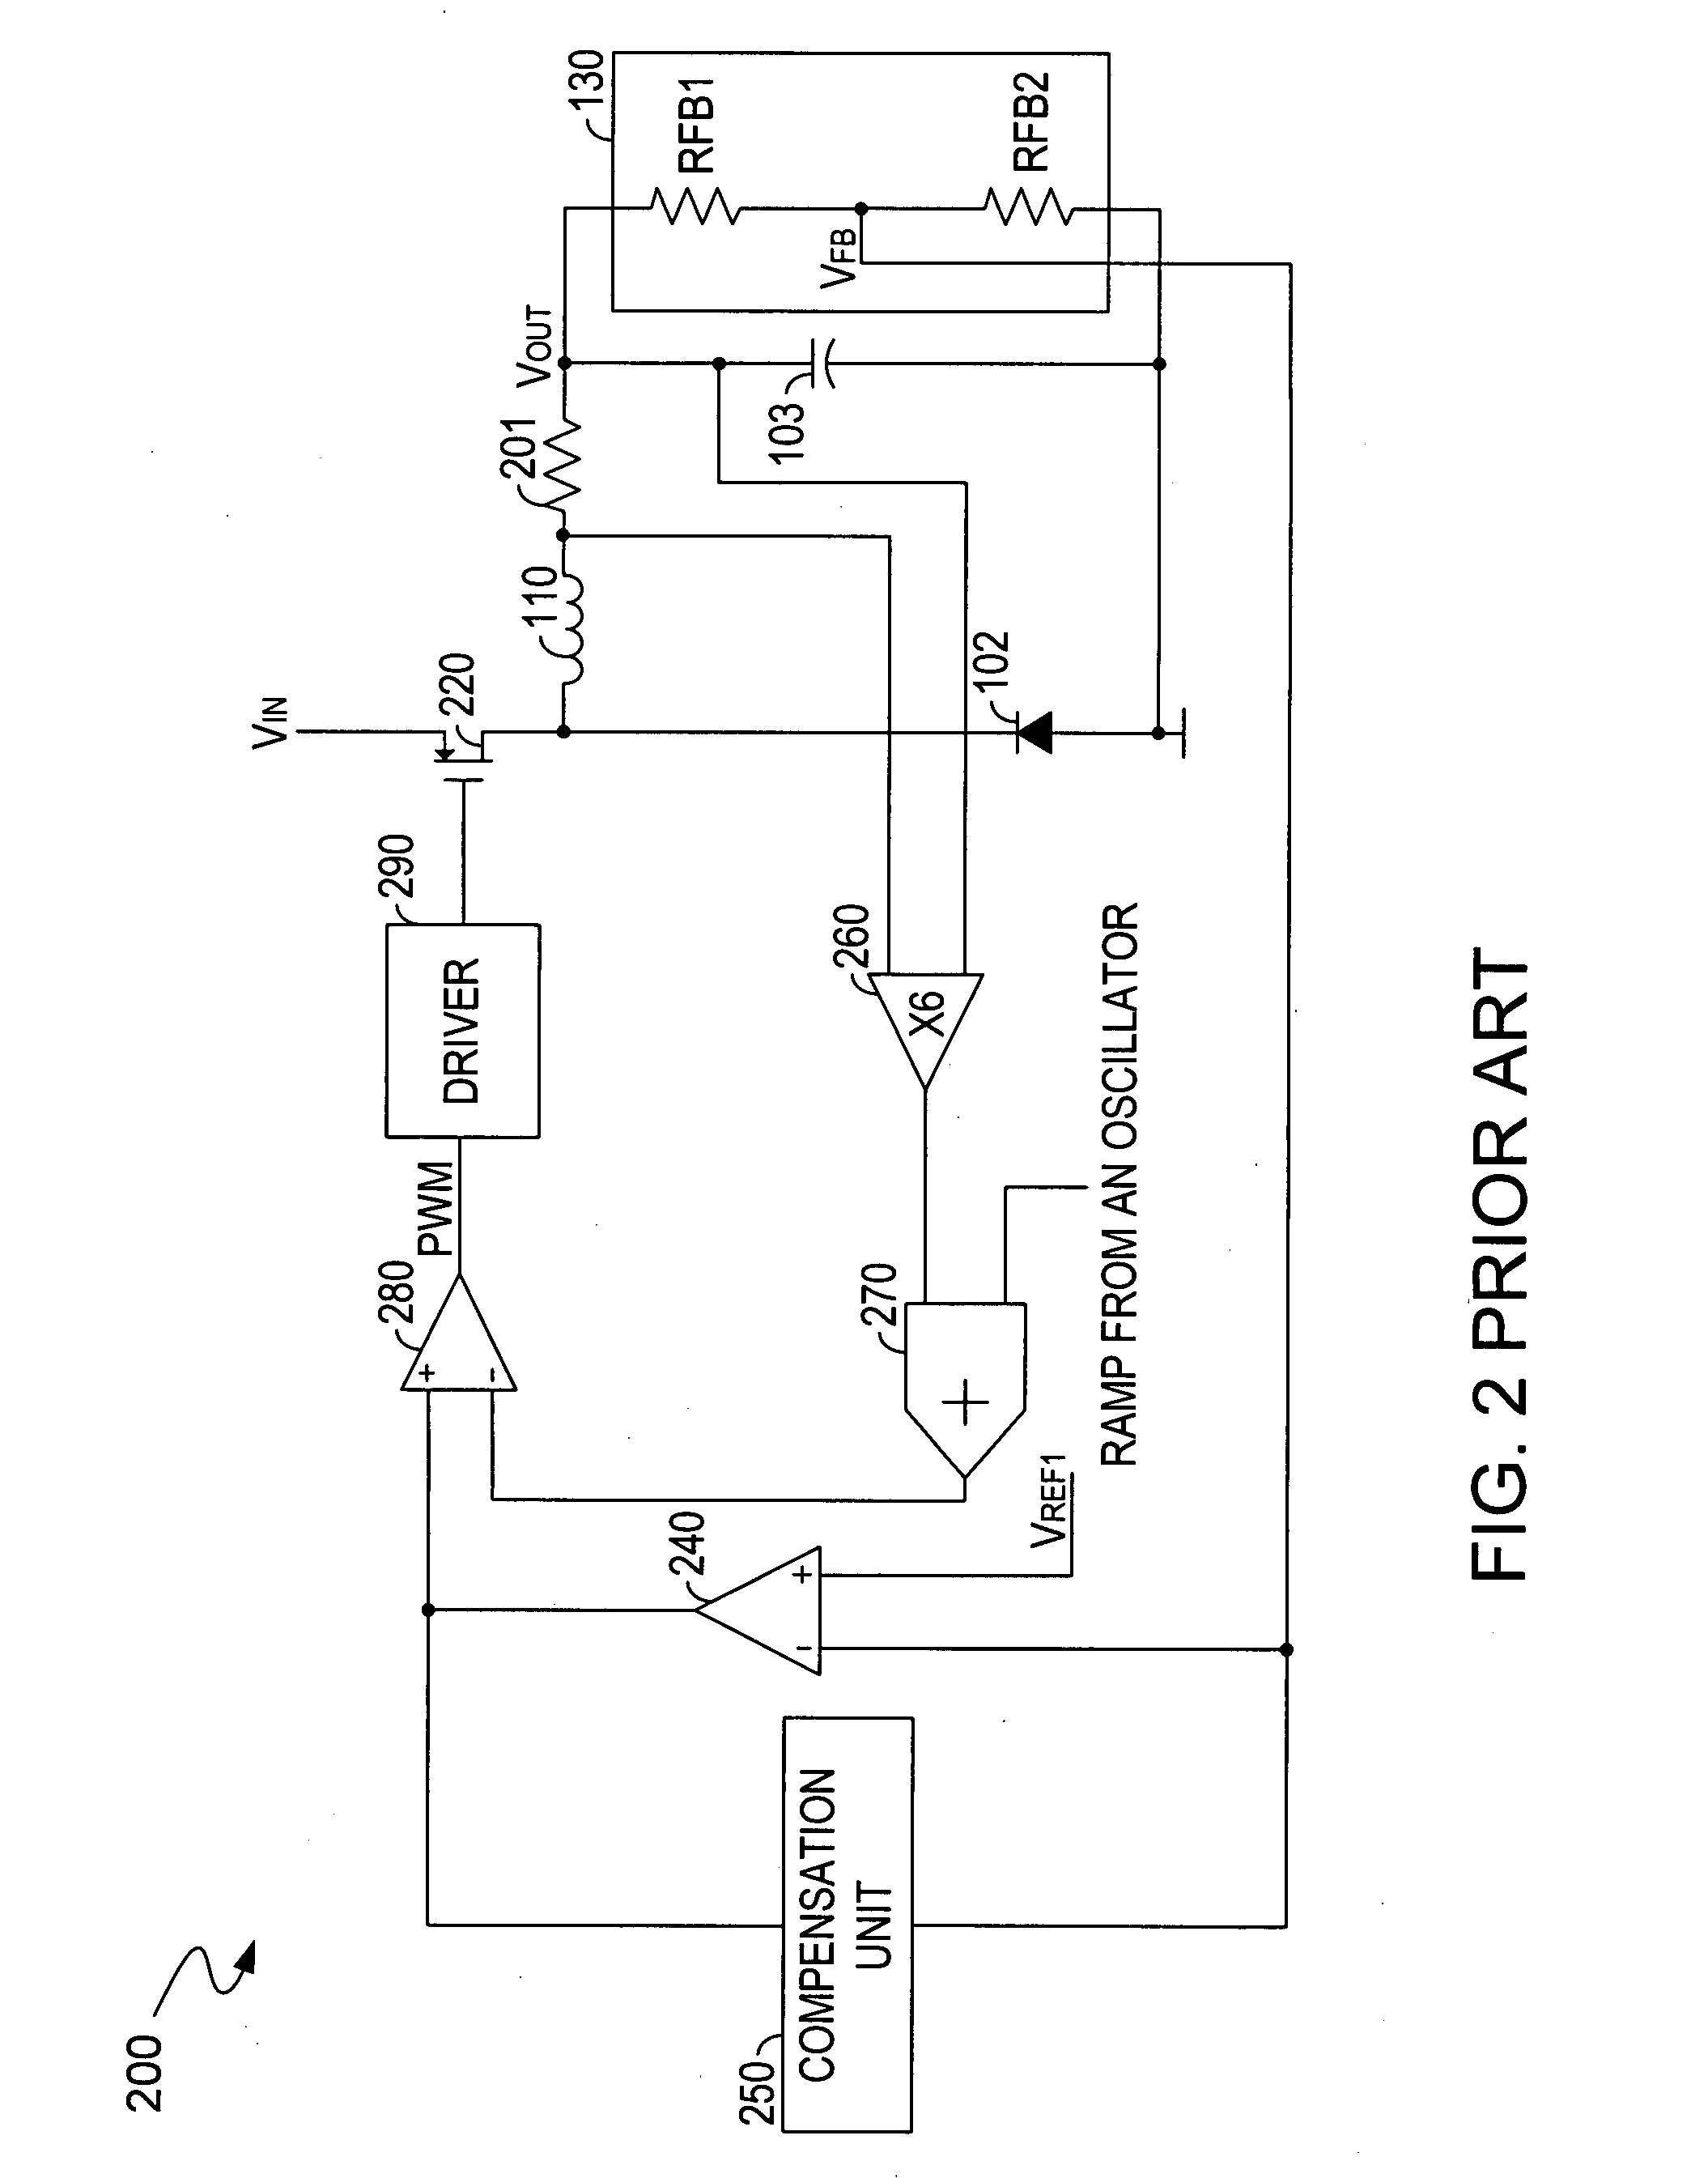 Current-mode DC-to-DC-converter